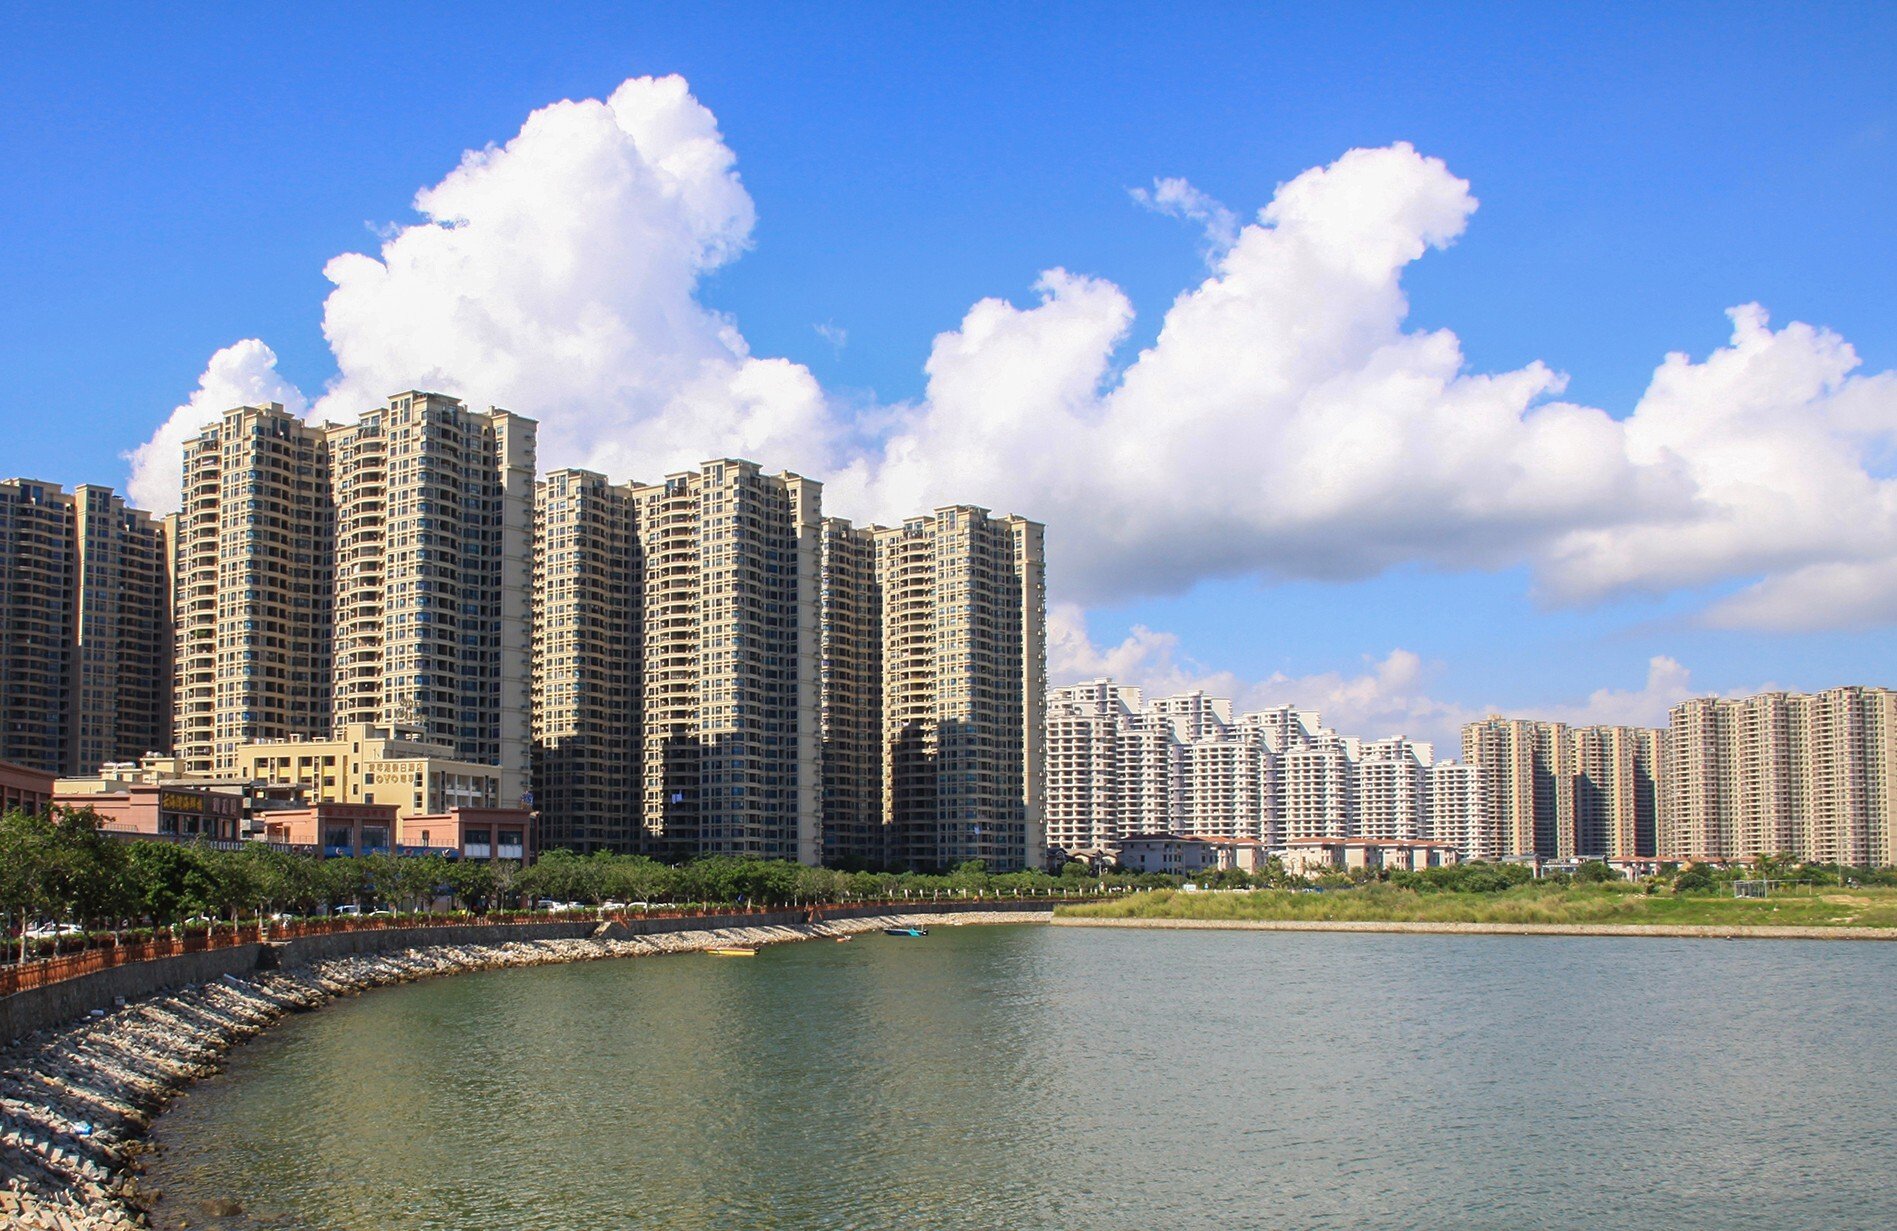 Home prices in Huizhou saw the second-biggest gains in mainland China, climbing 6.7 per cent between March and June. Photo: Shutterstock